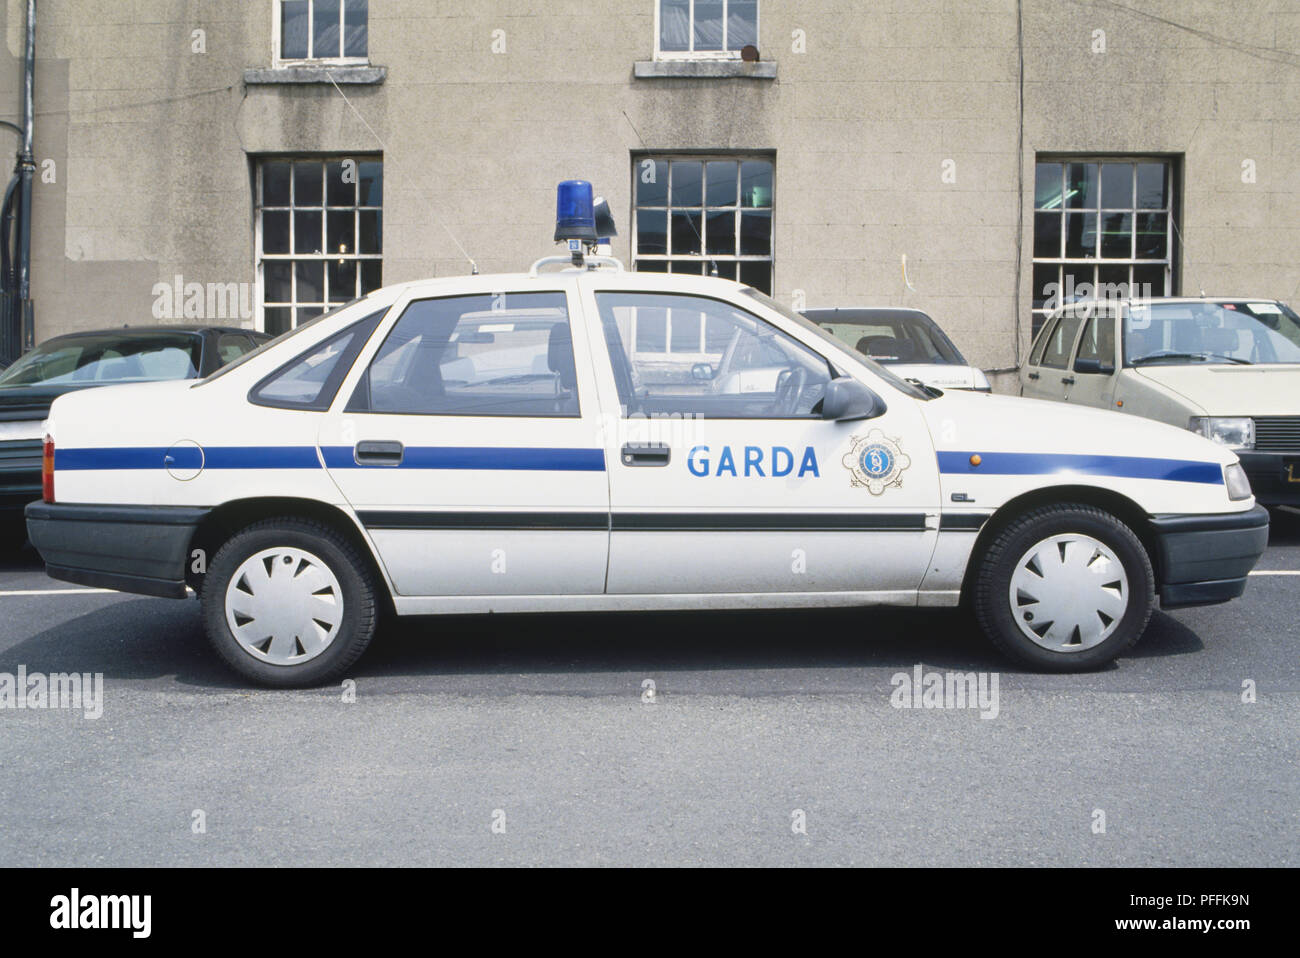 Republic of Ireland, Garda patrol car parked in front of civilian cars, outside grey building, side view. Stock Photo